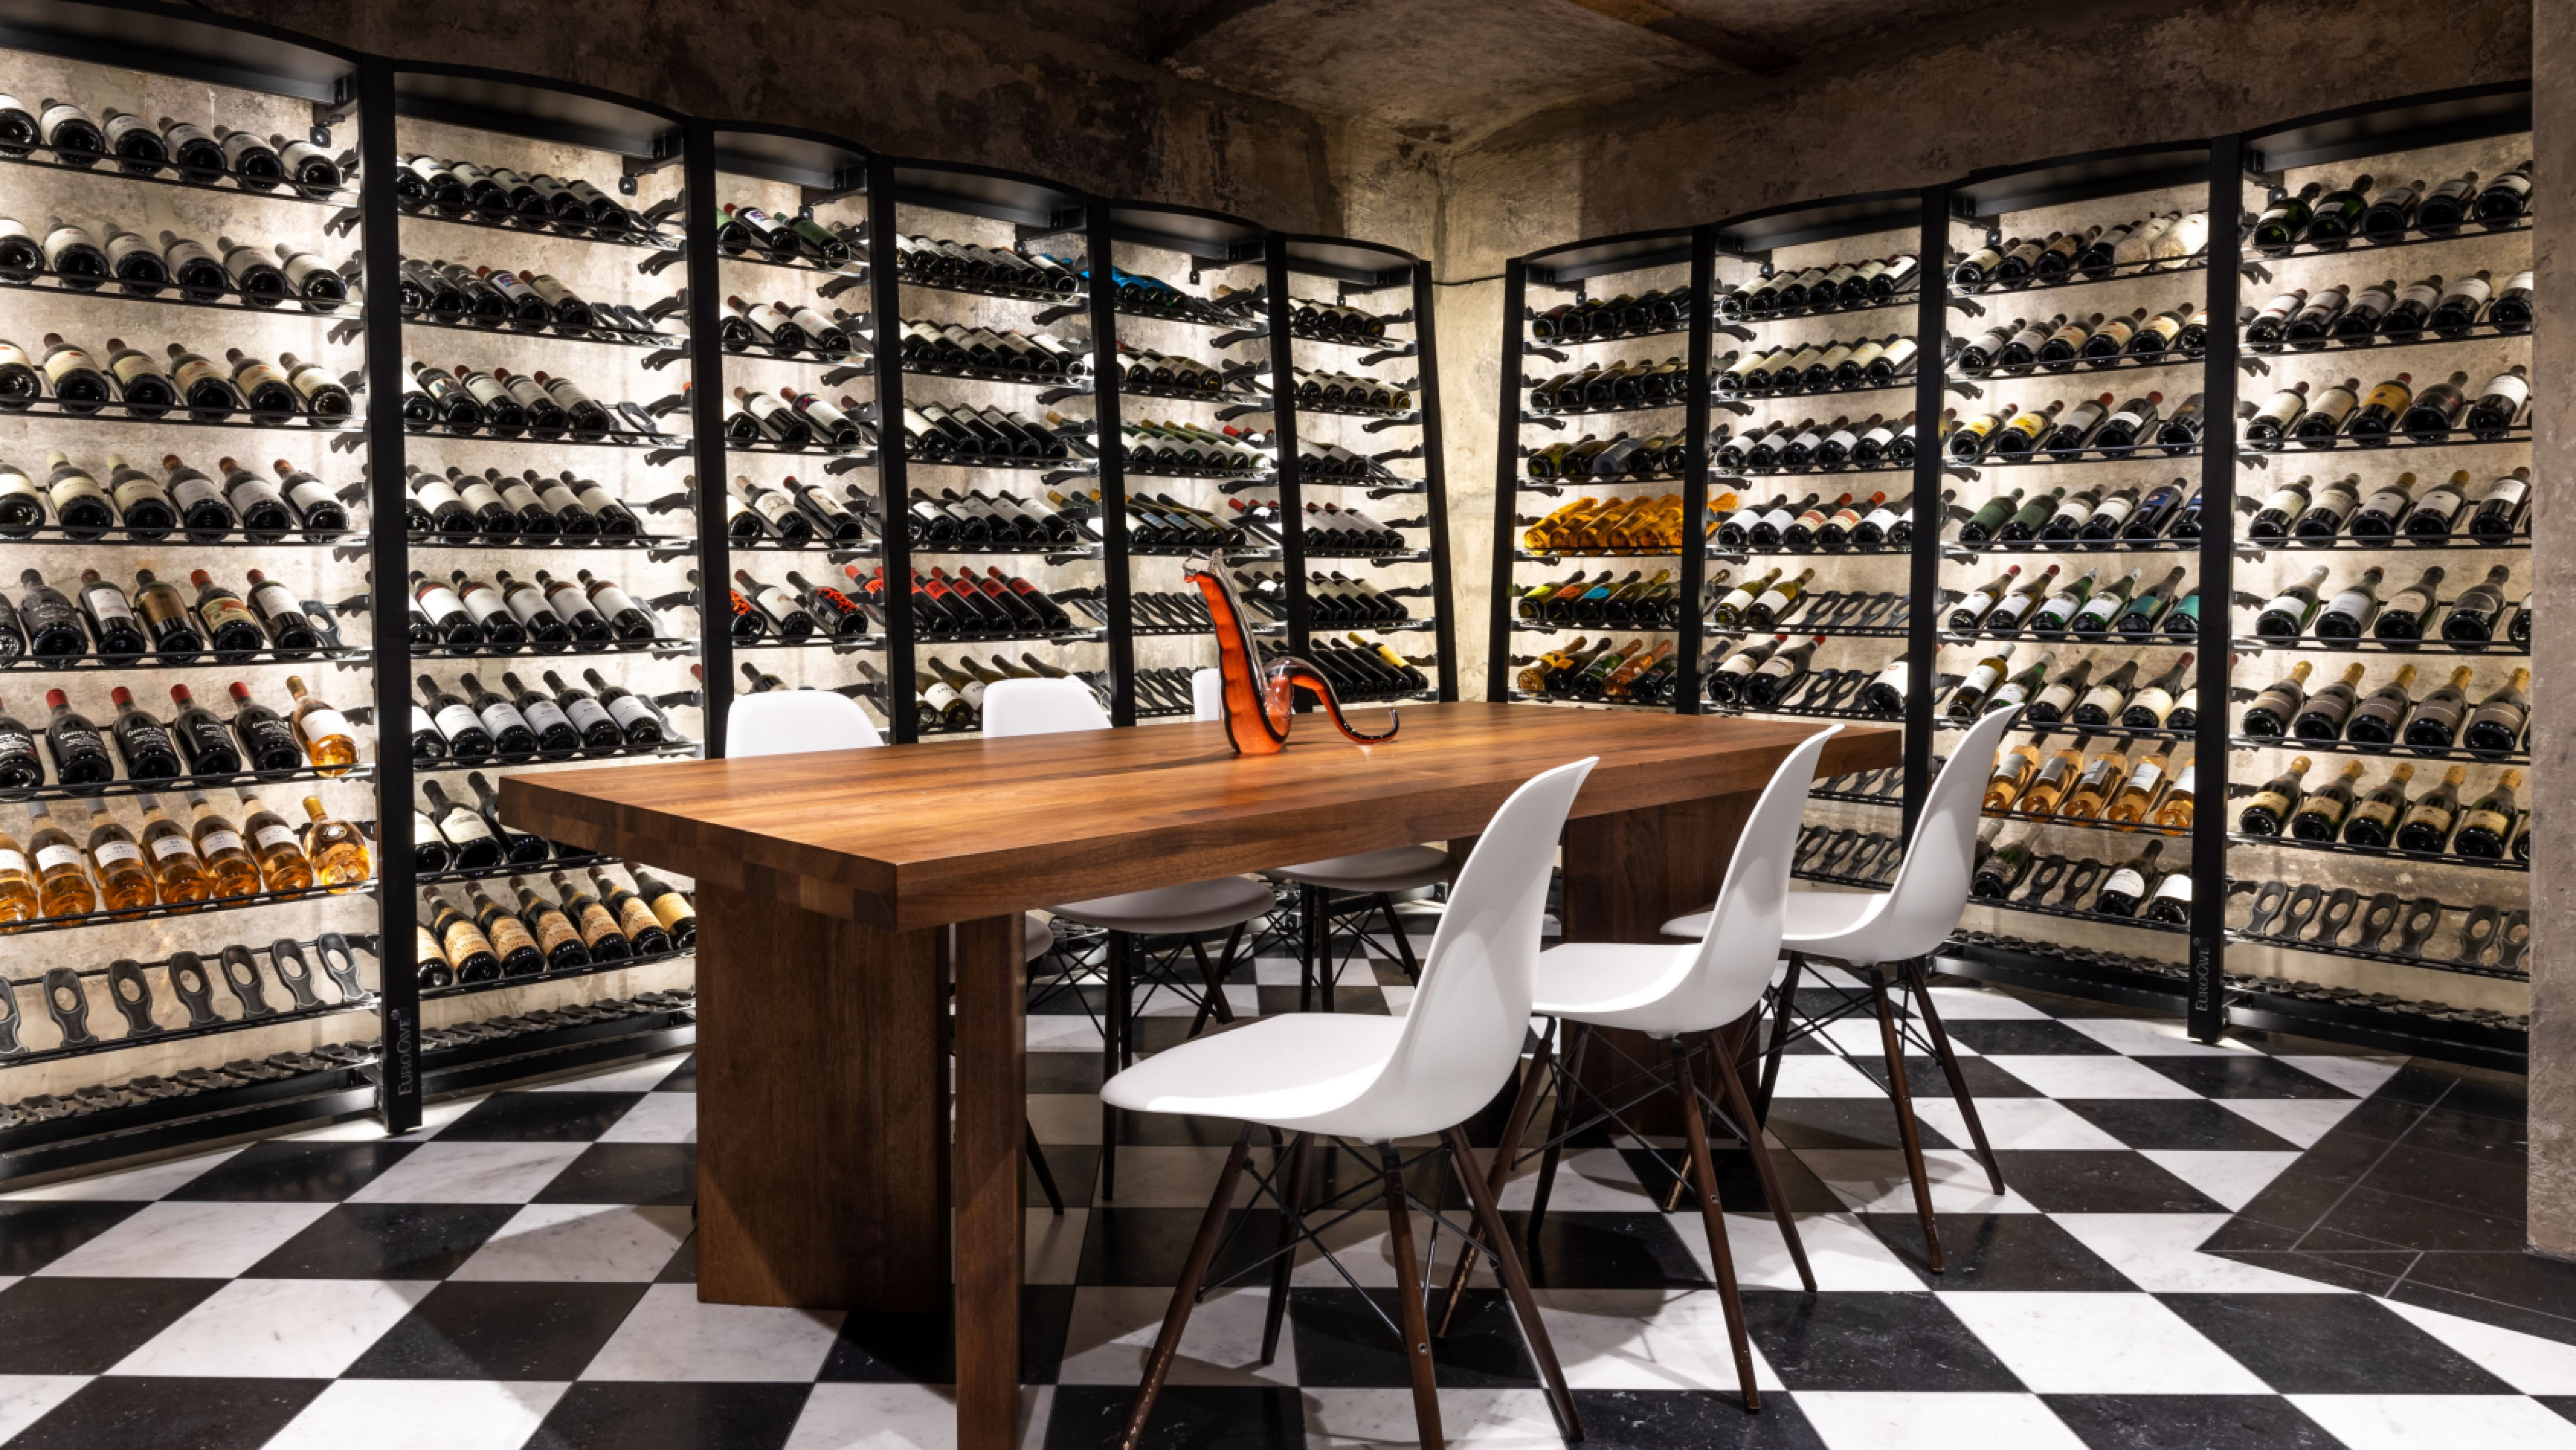 Photo of a dream wine cellar layout with a chic and modern aesthetic that will delight wine lovers.